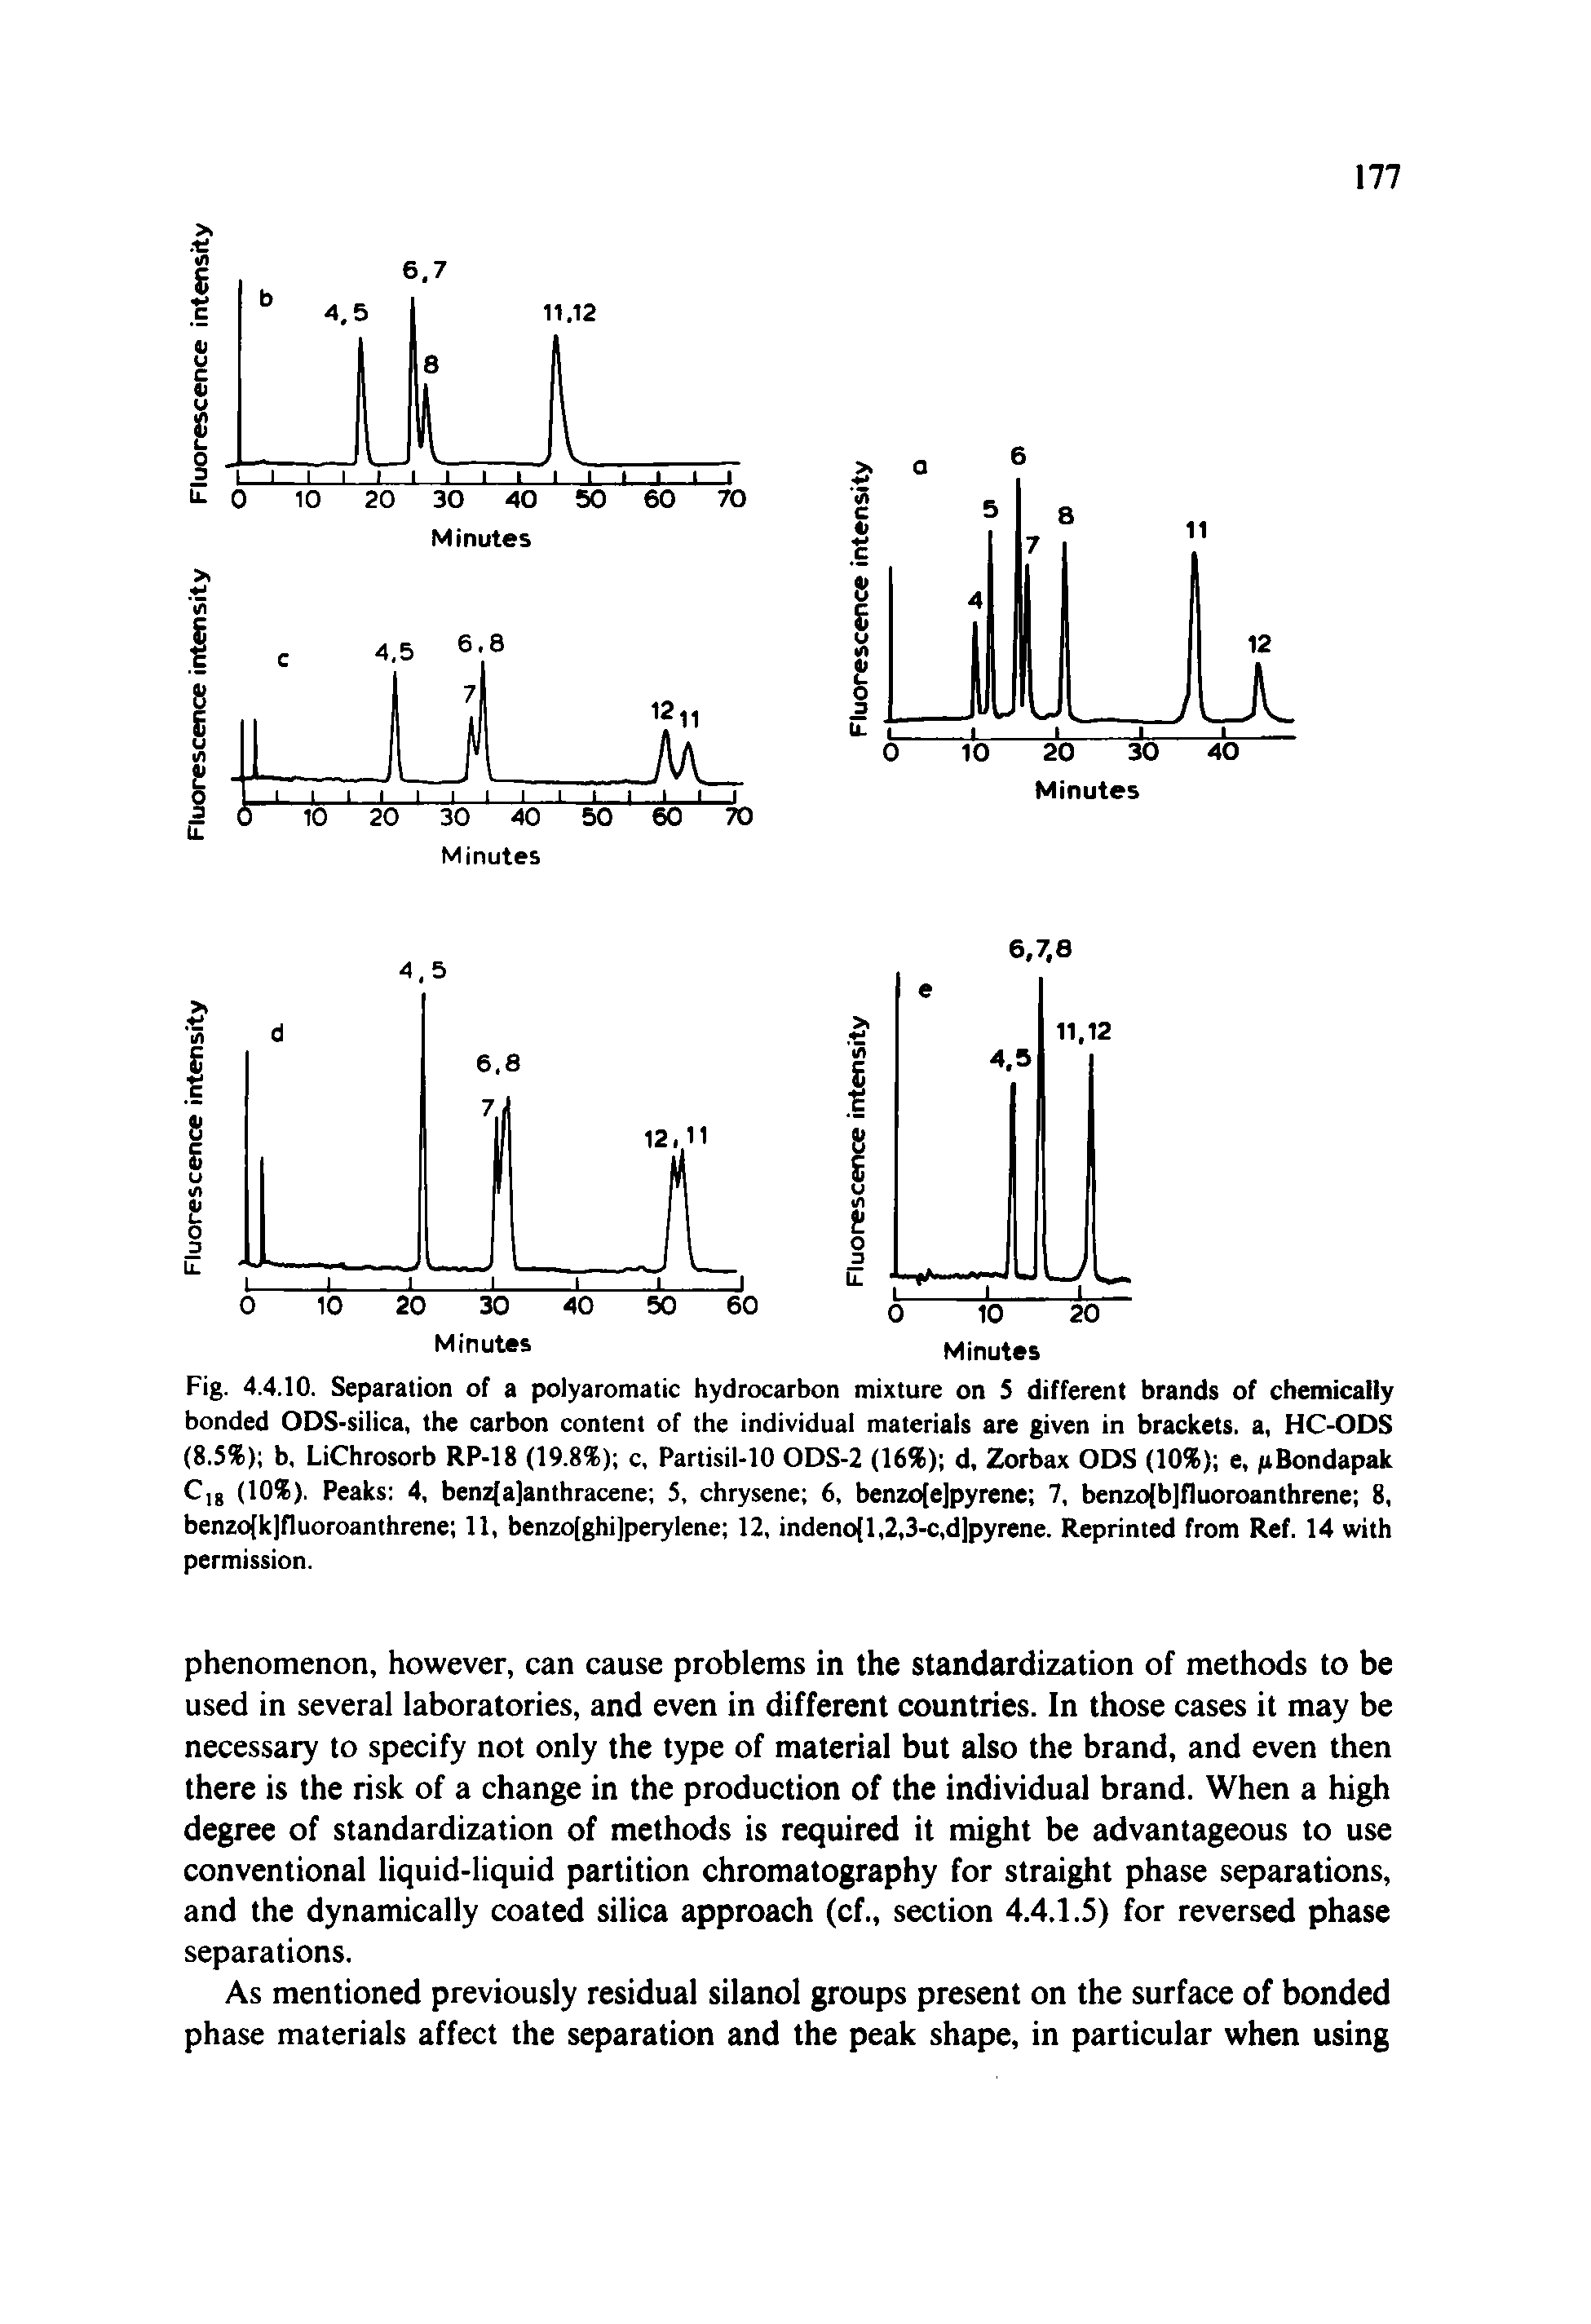 Fig. 4.4.10. Separation of a polyaromatic hydrocarbon mixture on 5 different brands of chemically bonded ODS-silica, the carbon content of the individual materials are given in brackets, a, HC-ODS (8.5%) b, LiChrosorb RP-18 (19.8%) c, Partisil-10 ODS-2 (16%) d, Zorbax ODS (10%) e, pBondapak C,g (10%). Peaks 4, benz[a]anthracene 5, chrysene 6, benzo[e]pyrene 7, benzo b]fluoroanthrene 8, benzo k]fIuoroanthrene 11, benzo[ghi]perylene 12, indeno[l,2,3-c,d]pyrene. Reprinted from Ref. 14 with permission.